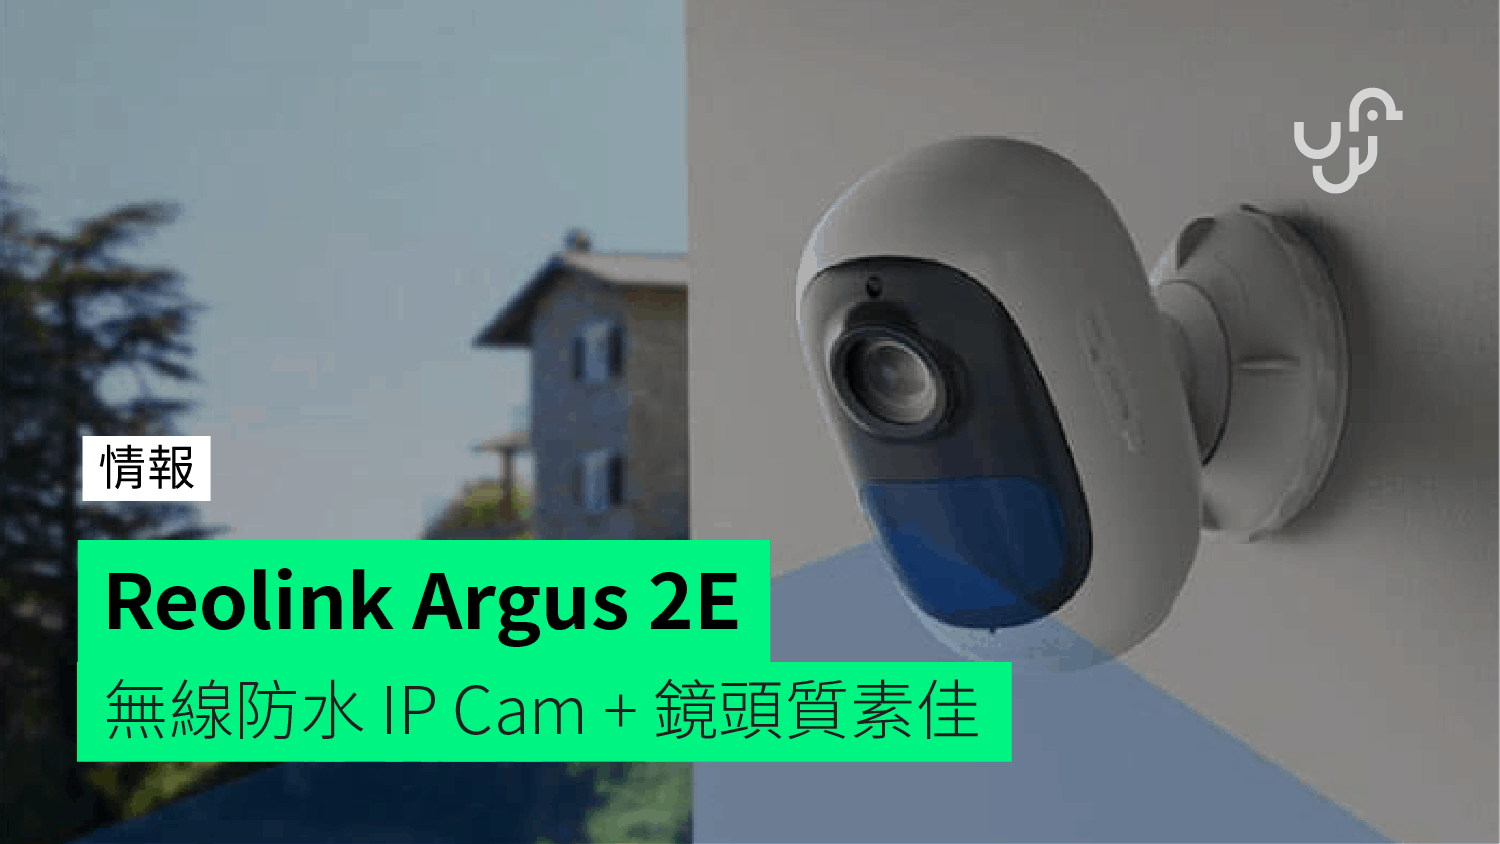 Reolink Argus 2E Waterproof Wireless IP Camera + Good Lens Quality